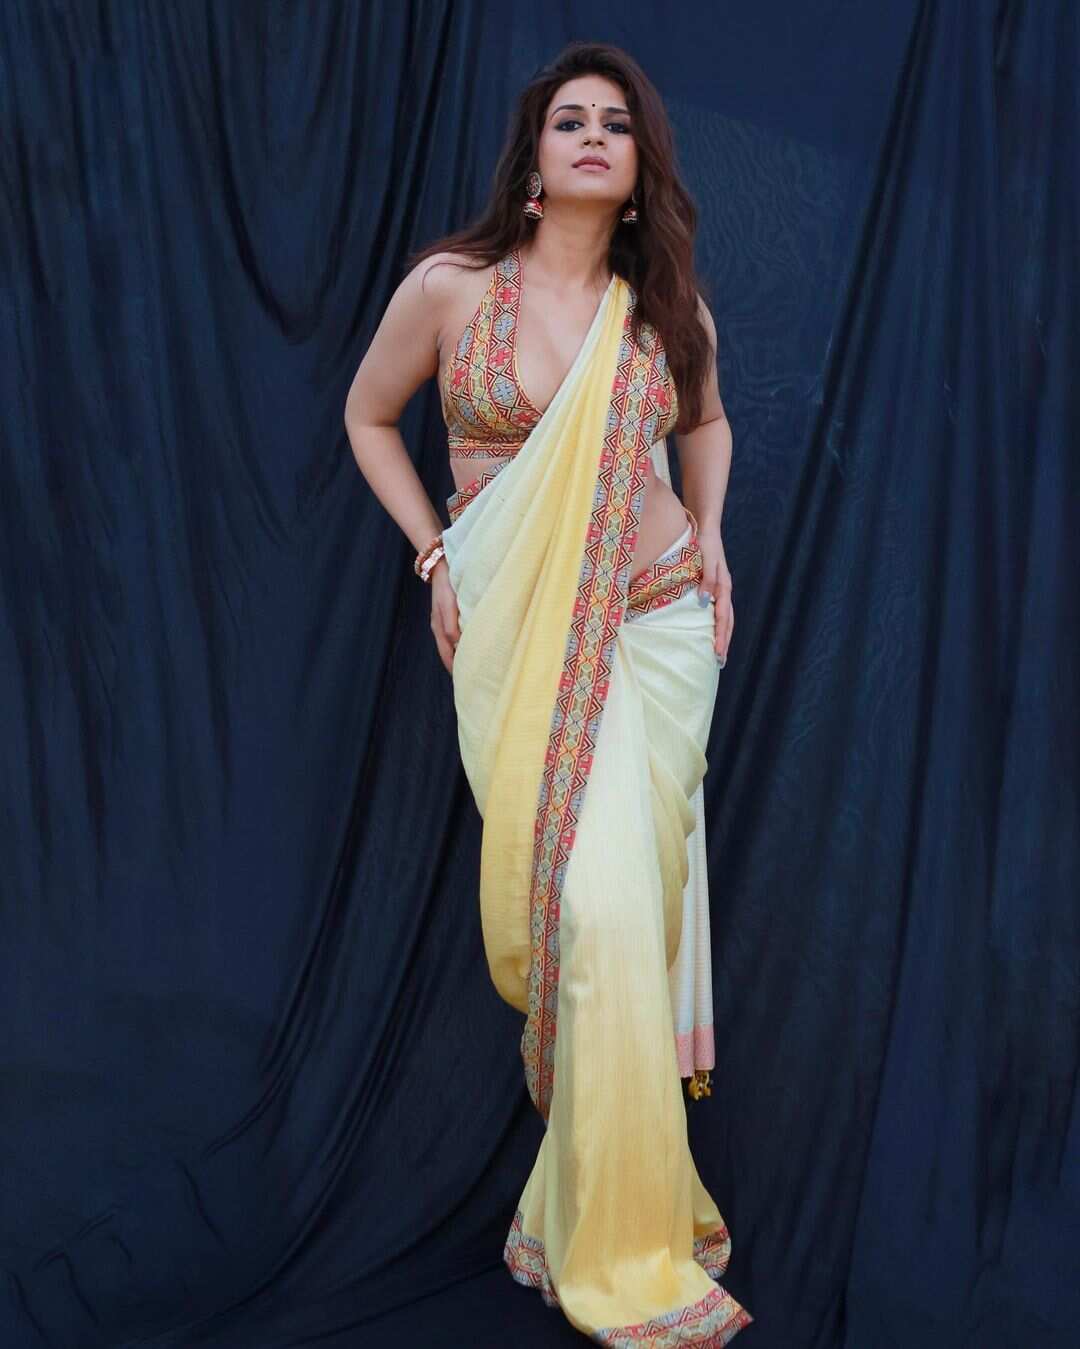 Shraddha Das casts a spell in a captivating yellow saree